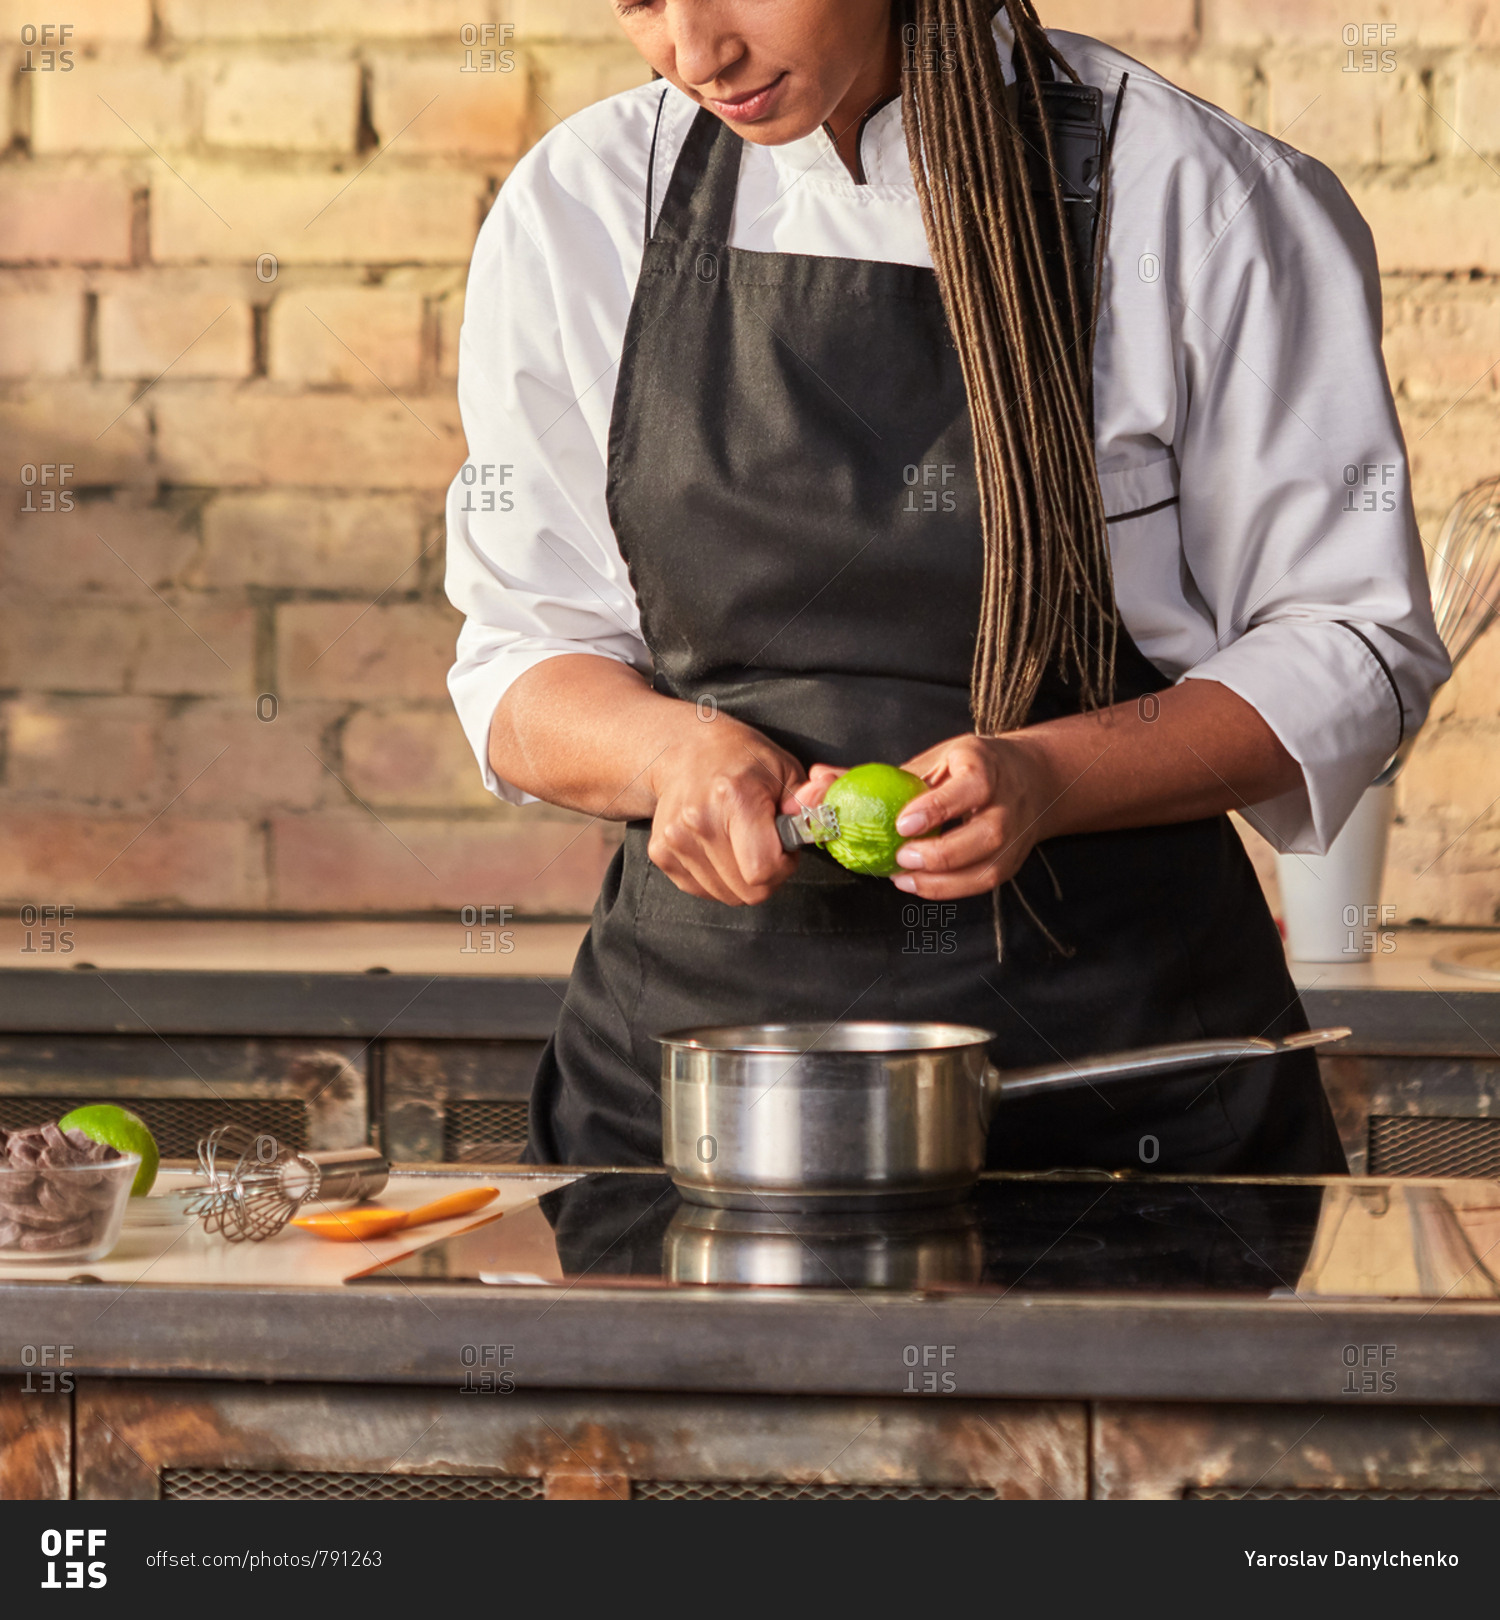 Woman baker cuts lime peel for cooking homemade desserts, green mint on the kitchen table on a brick wall background. Fresh natural ingredients for desserts. Step by step dessert making process.